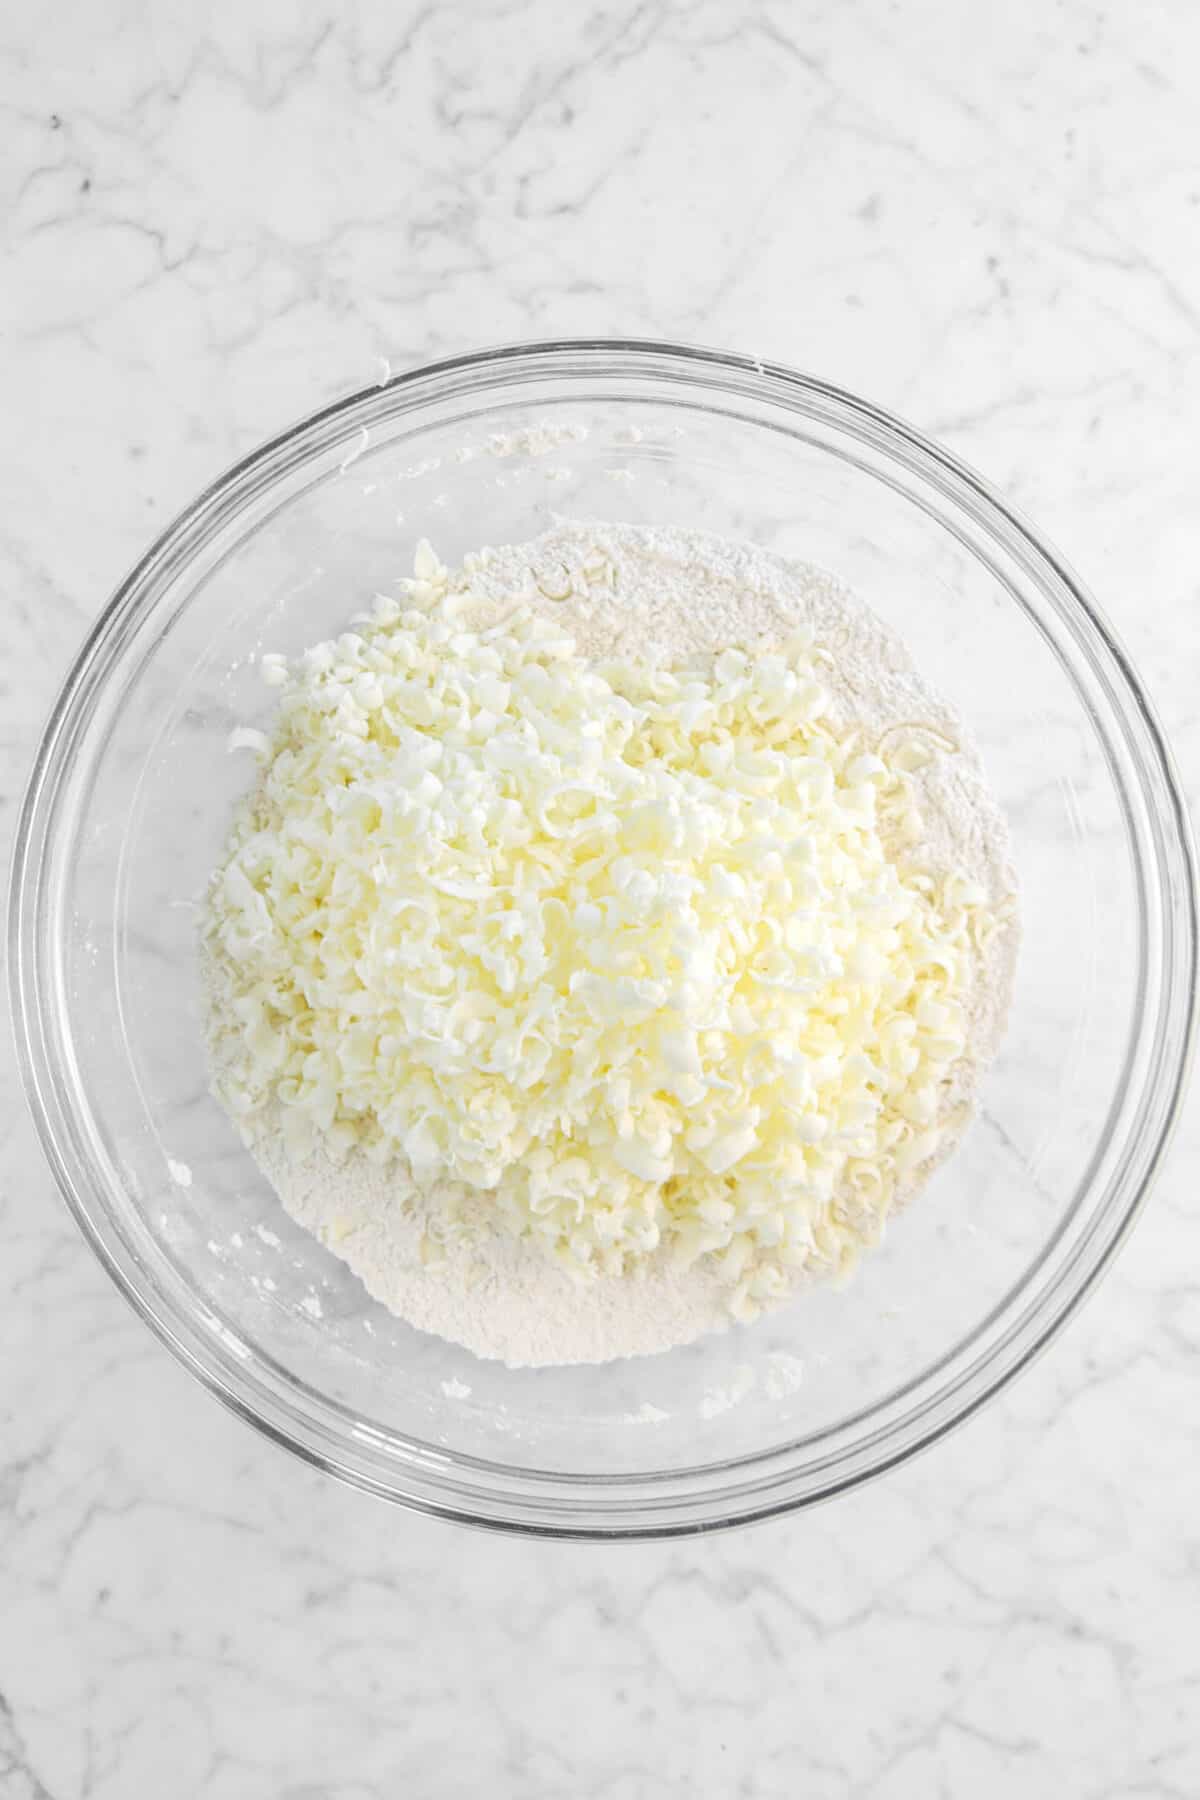 grated butter added to flour mixture